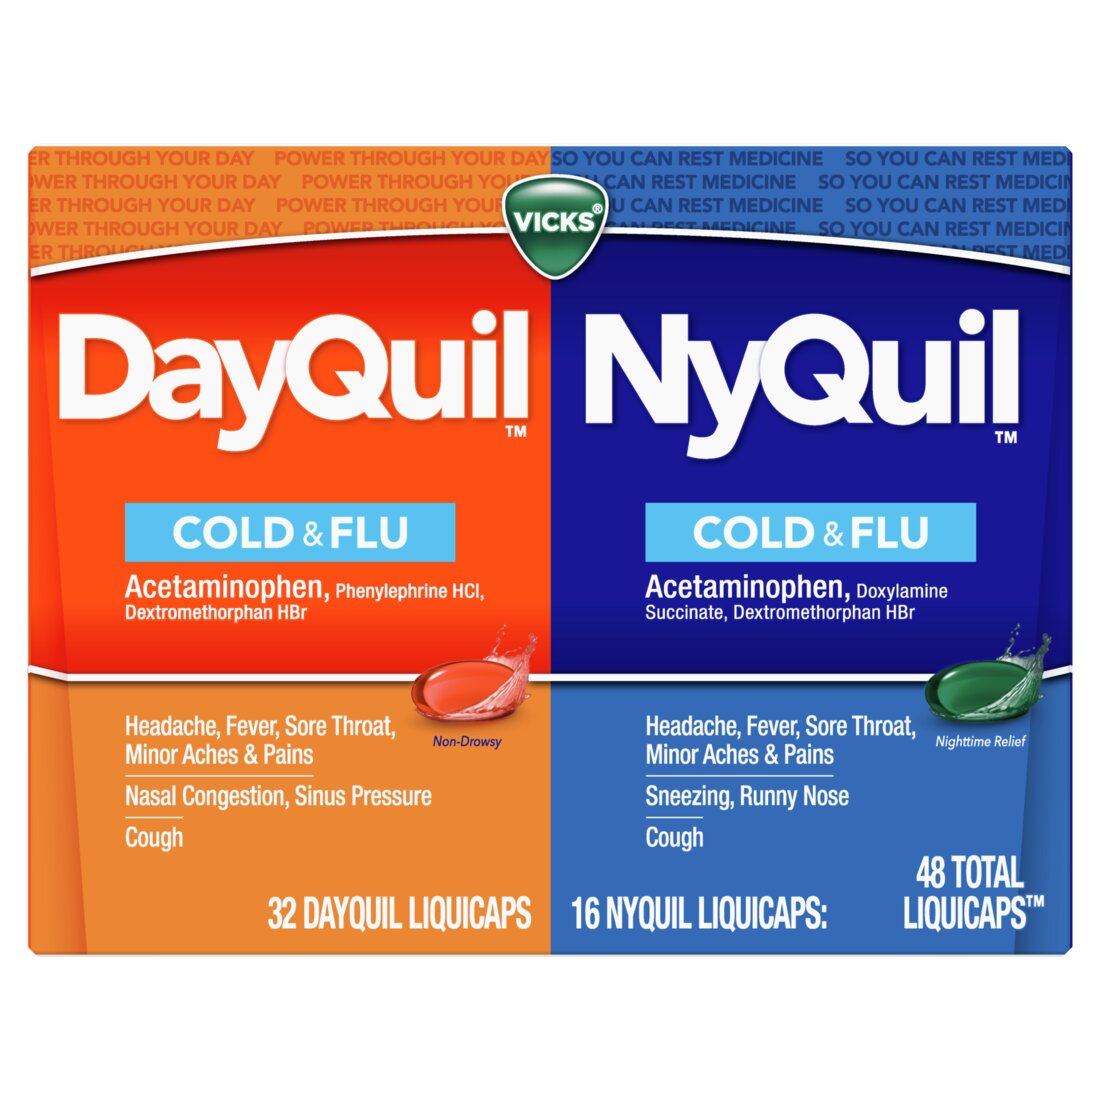 Vicks DayQuil and NyQuil Combo Pack Cold & Flu Medicine (32 DayQuil+16 NyQuil) - 48ct/12pk